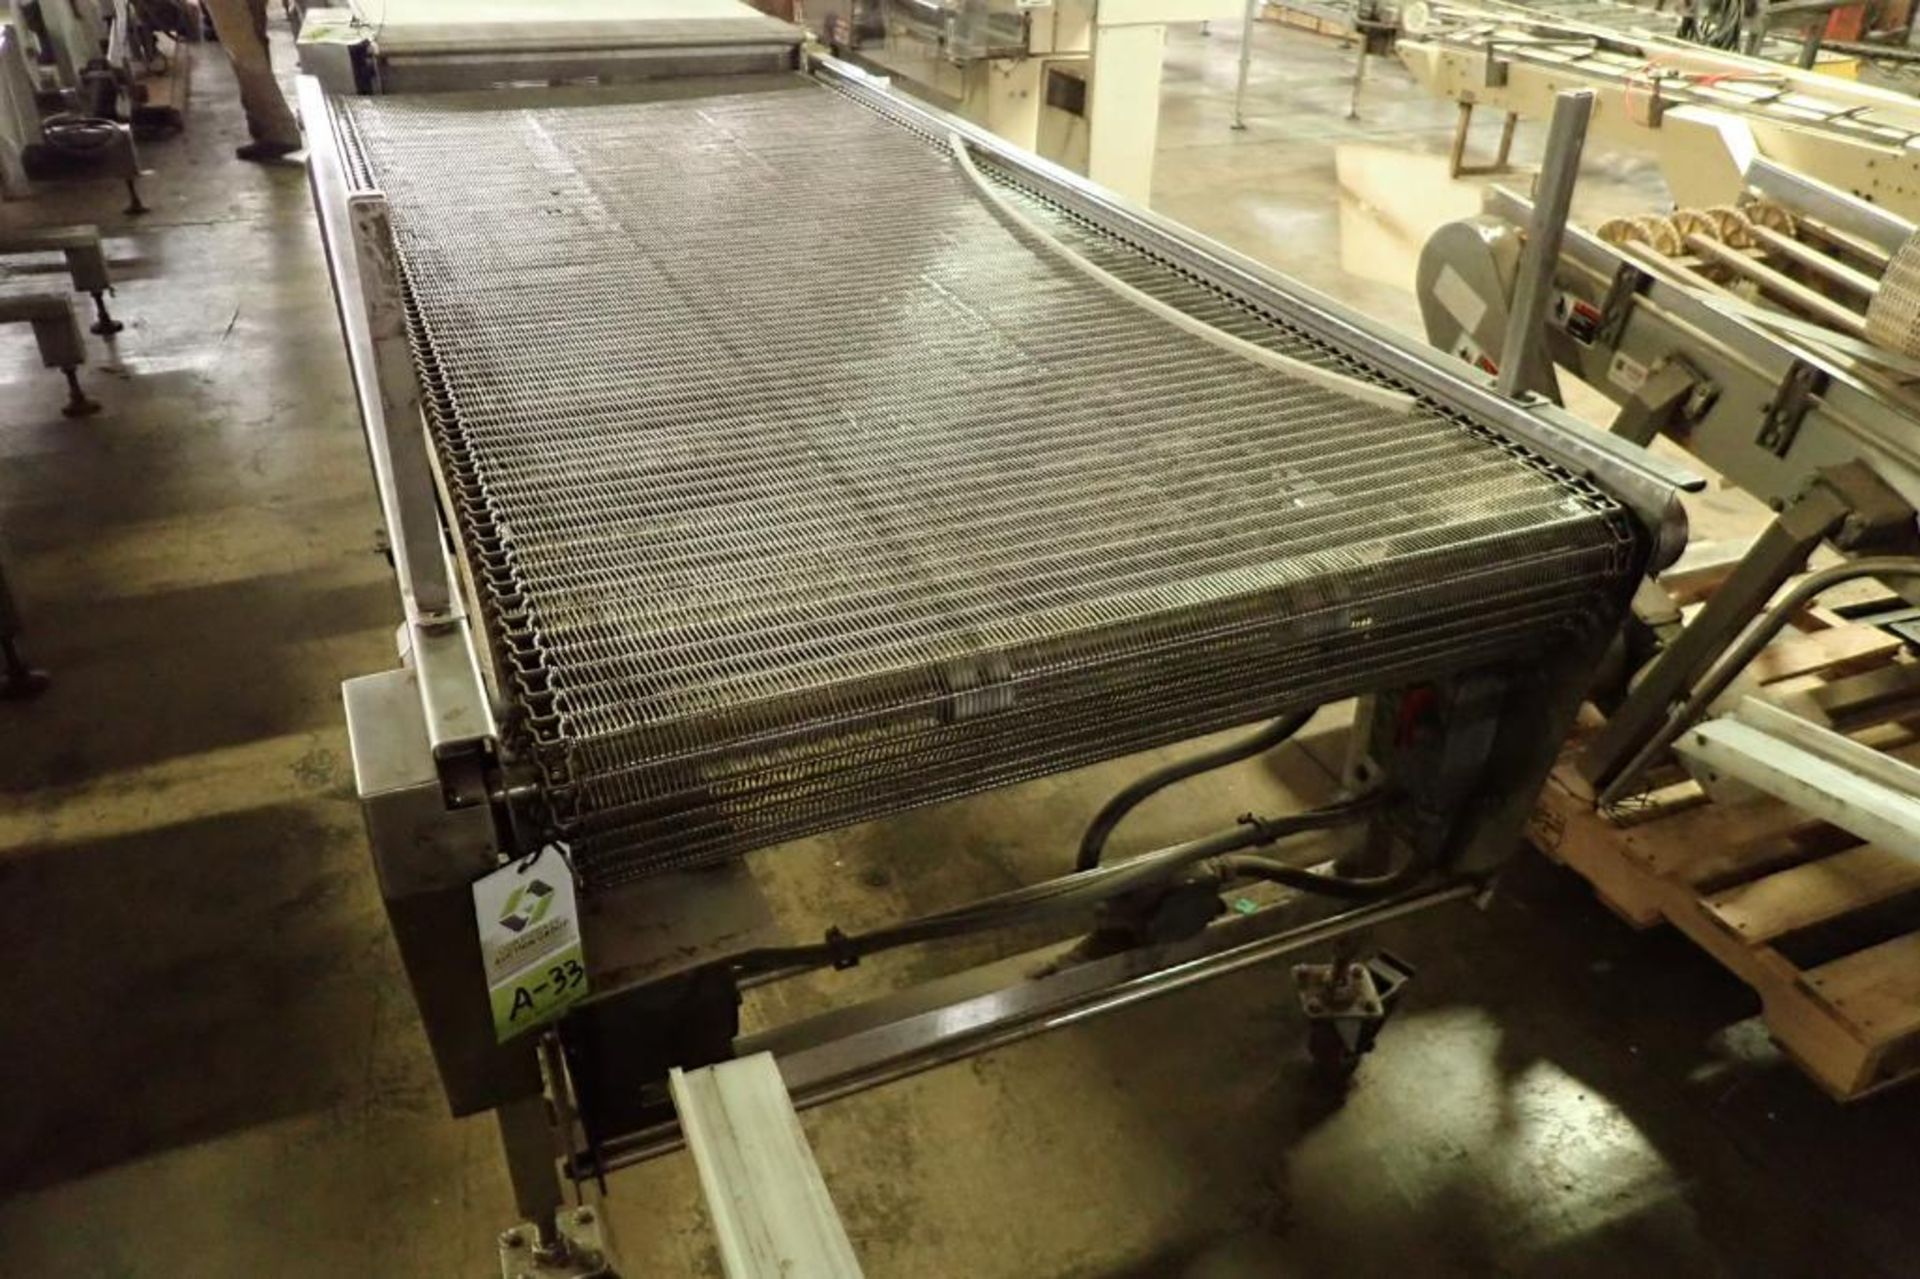 Kleenline SS conveyor {Located in Indianapolis, IN} - Image 2 of 6